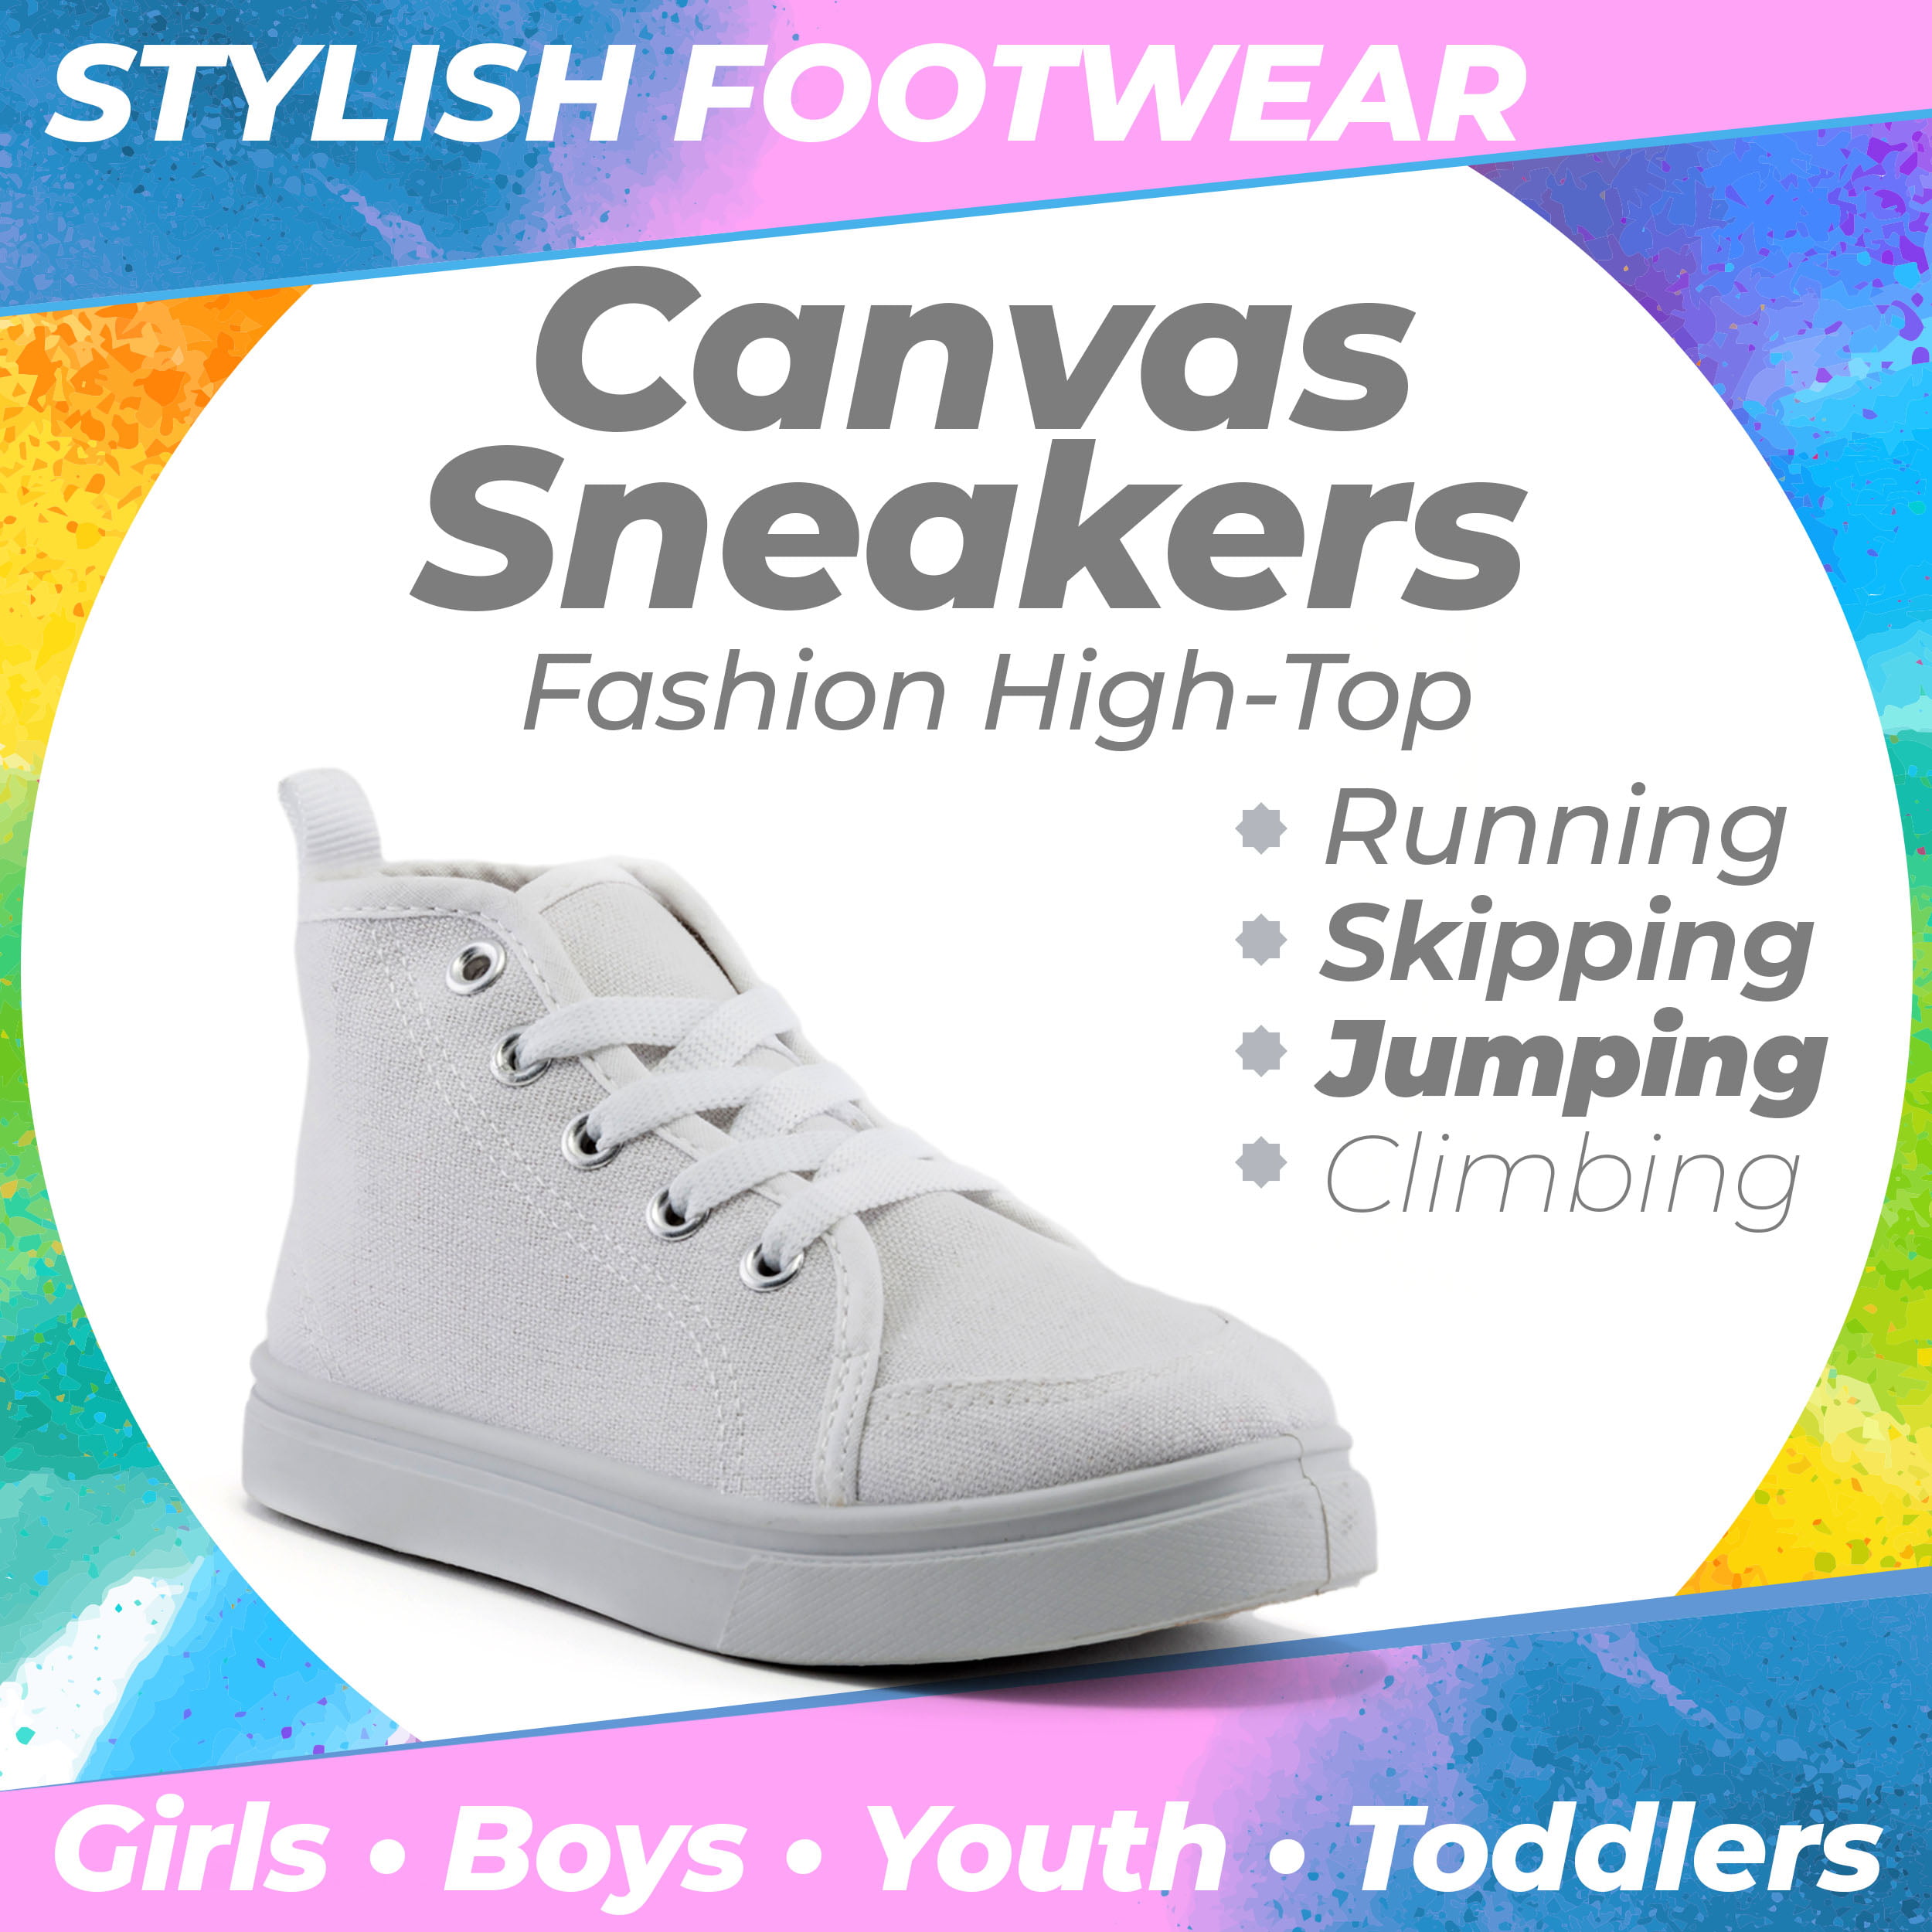 ZOOGS Fashion High-Top Canvas Sneakers Girls Boys Youth Toddlers & Kids